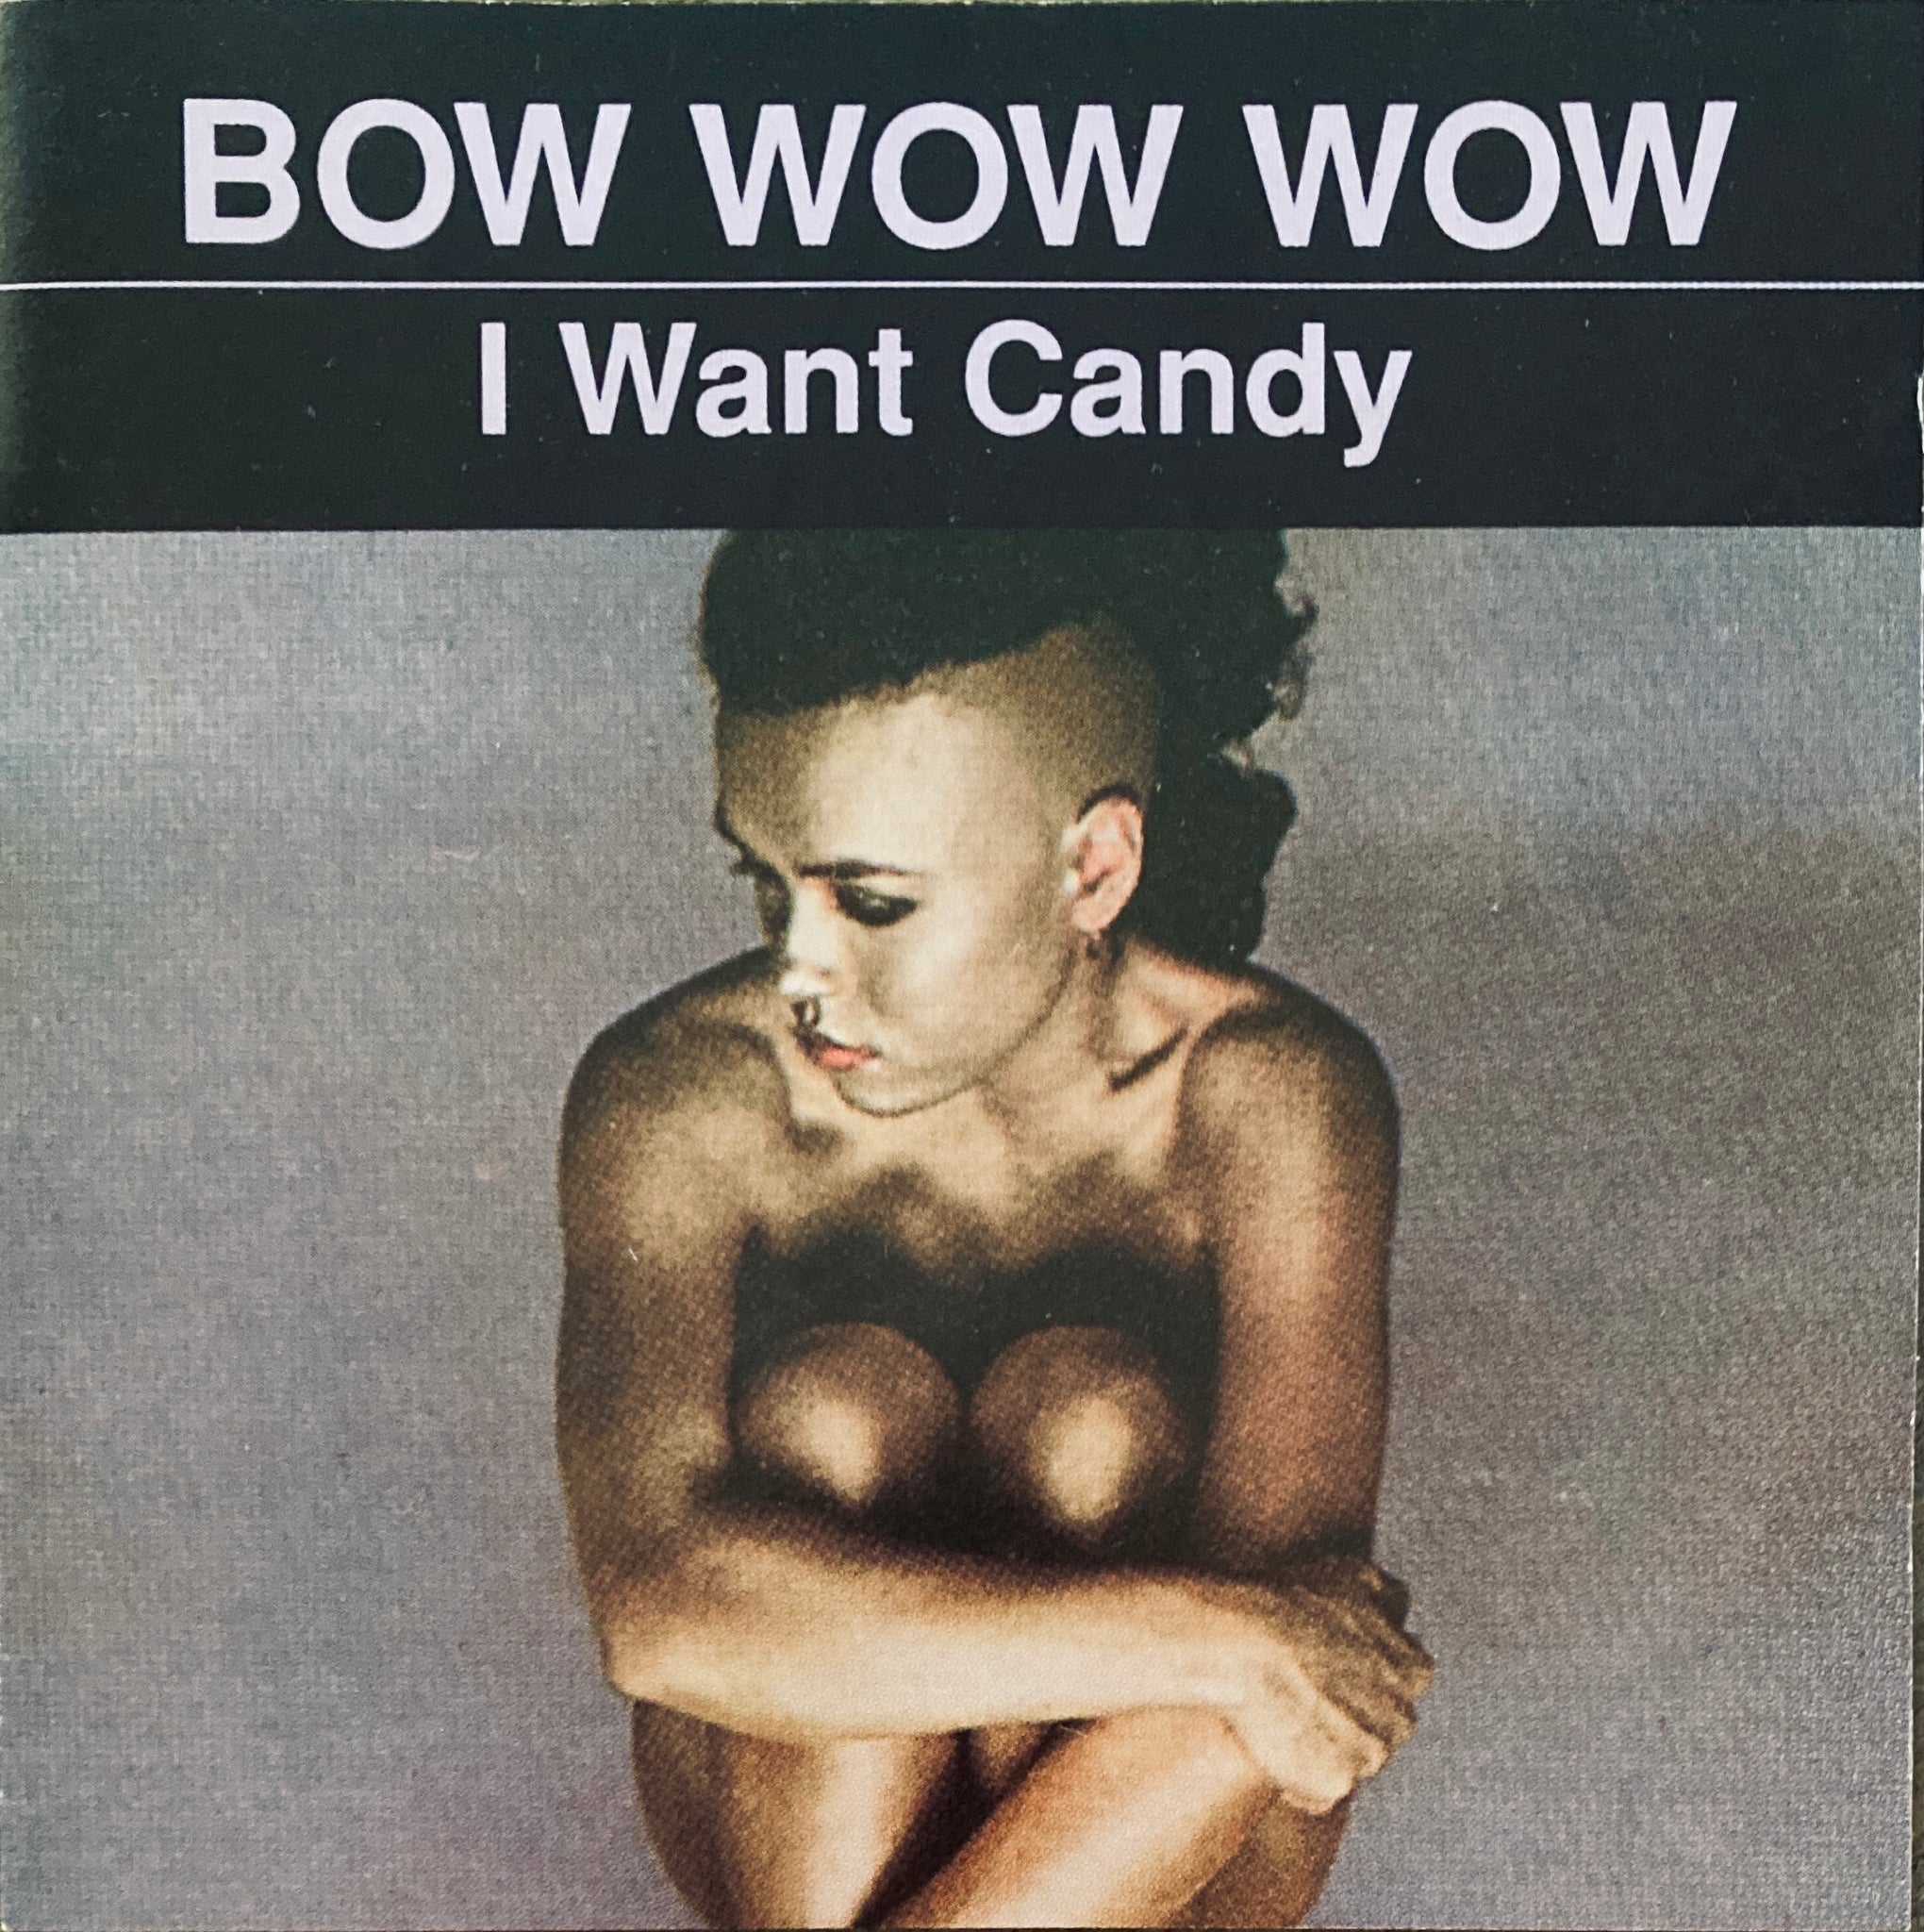 Bow Wow Wow “I Want Candy” CD (1982)